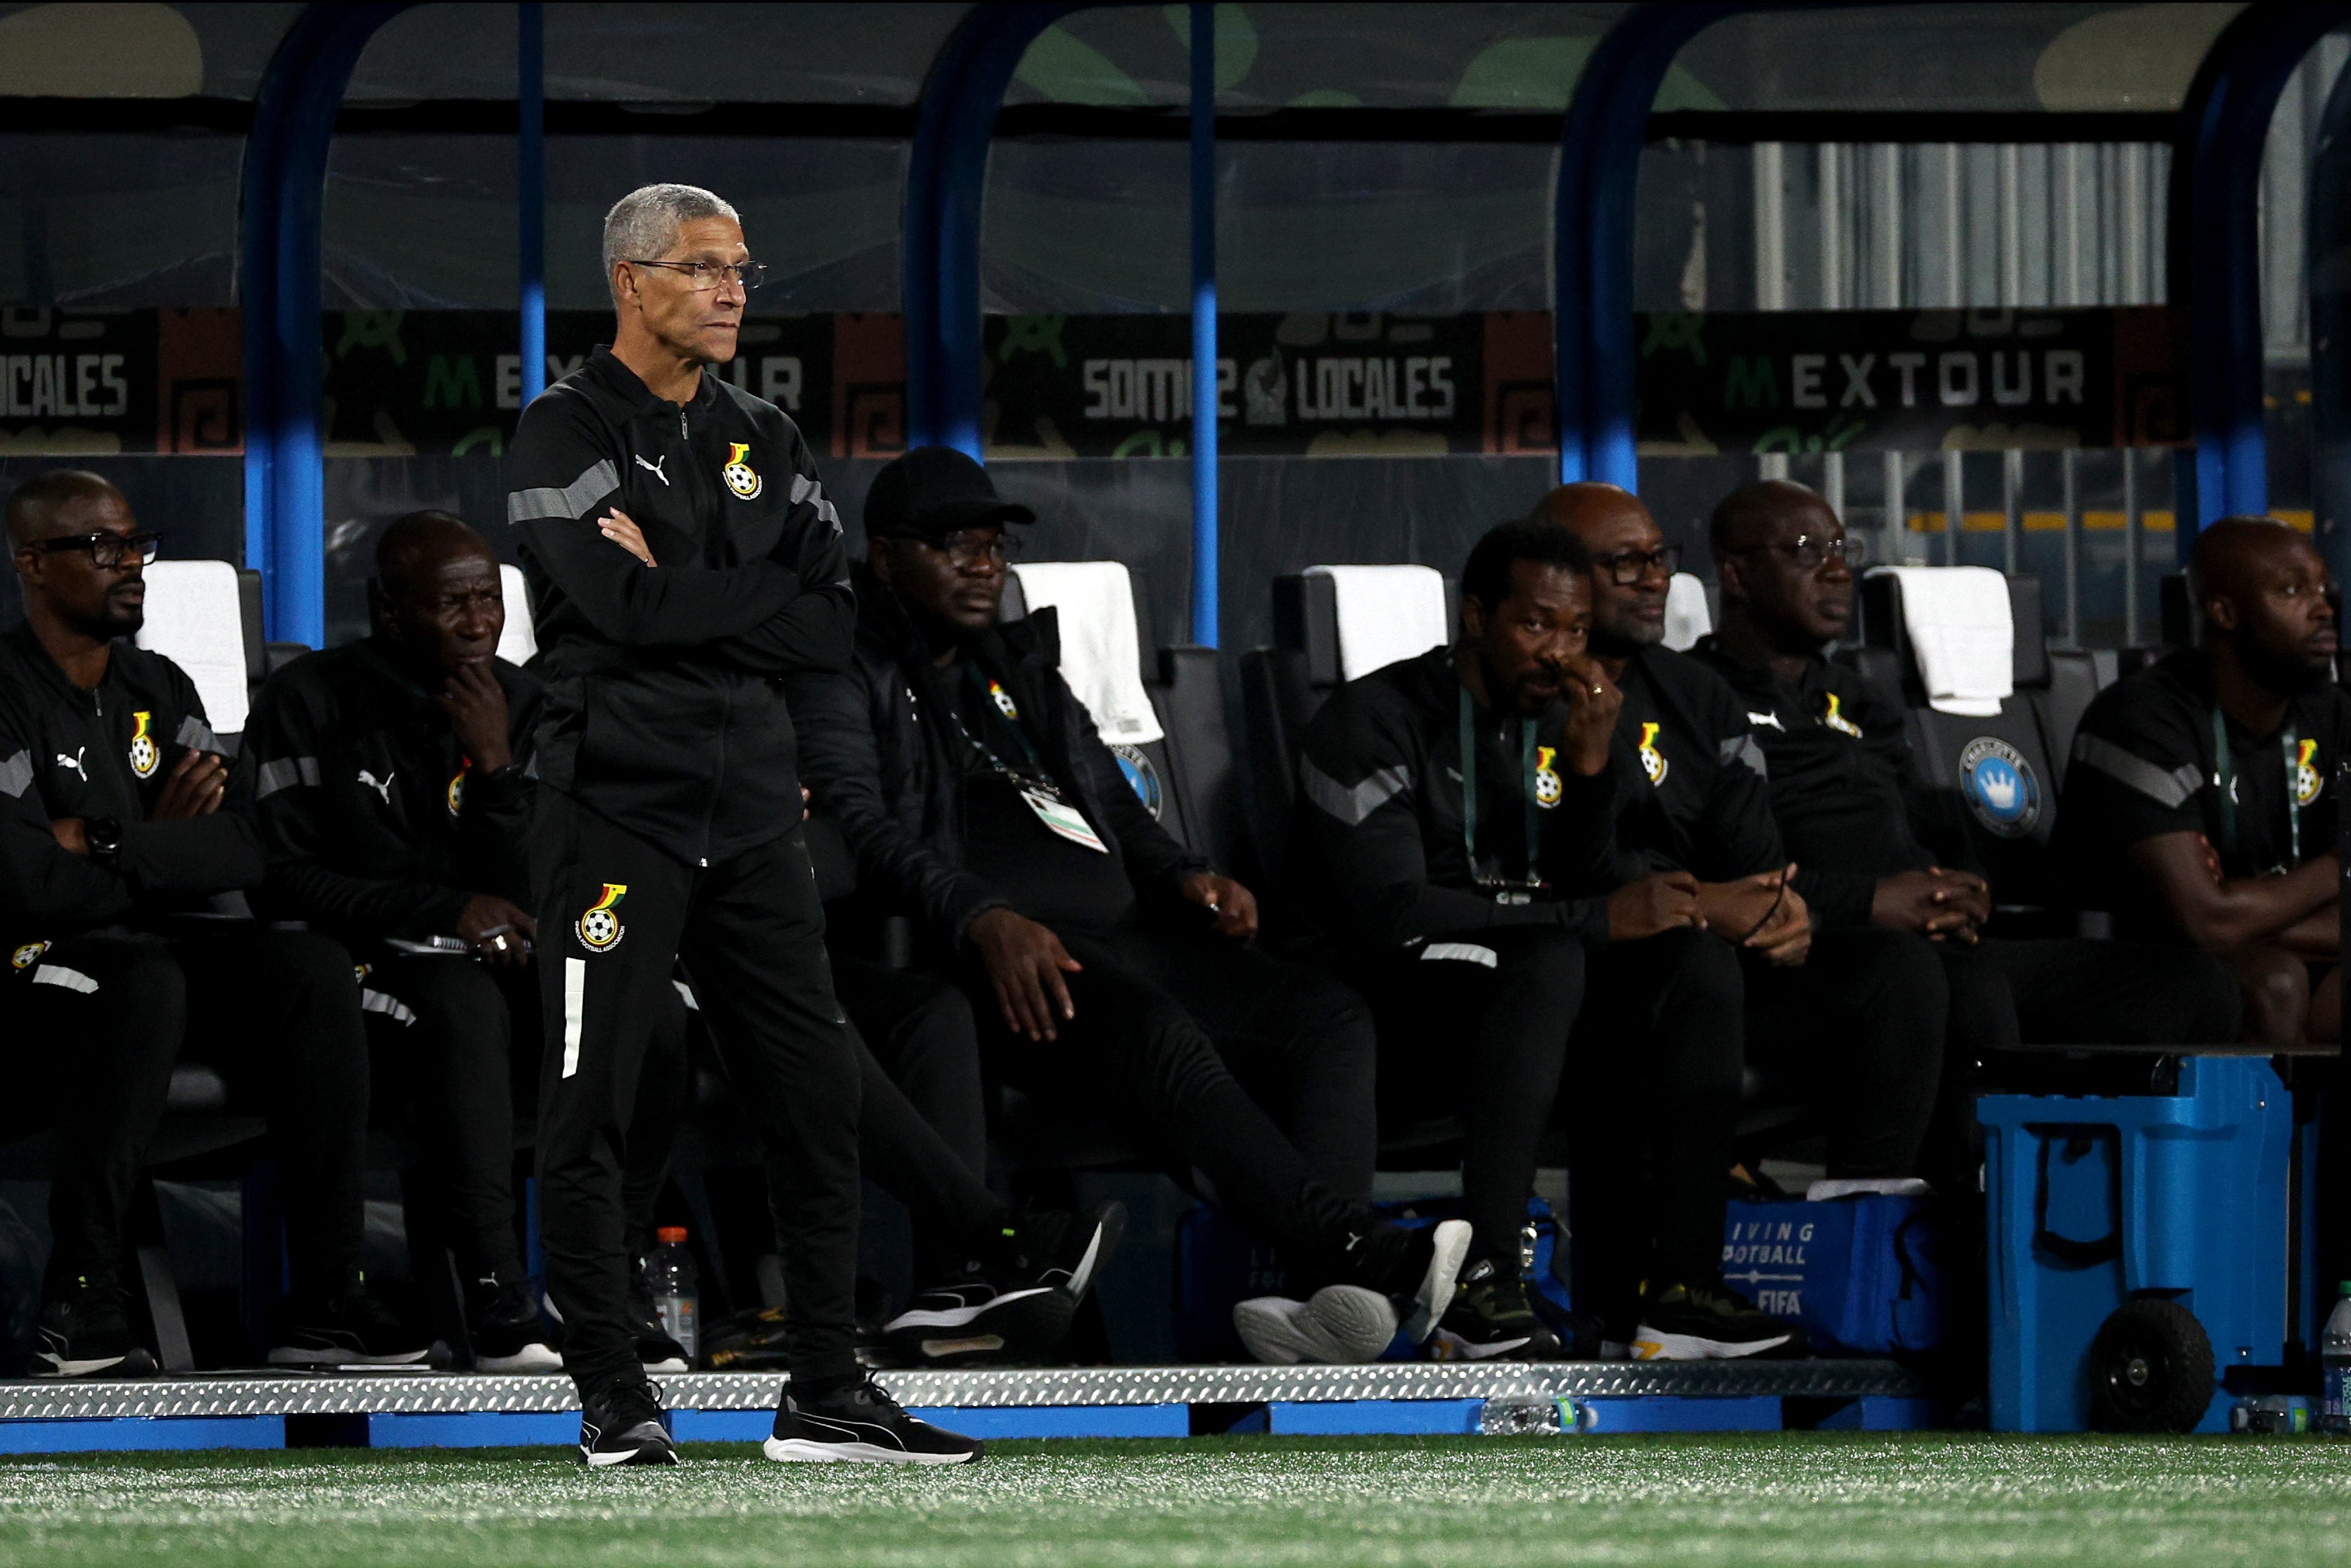 Chris Hughton’s Ghana suffered a surprise defeat to Cape Verde in their opening Afcon fixture